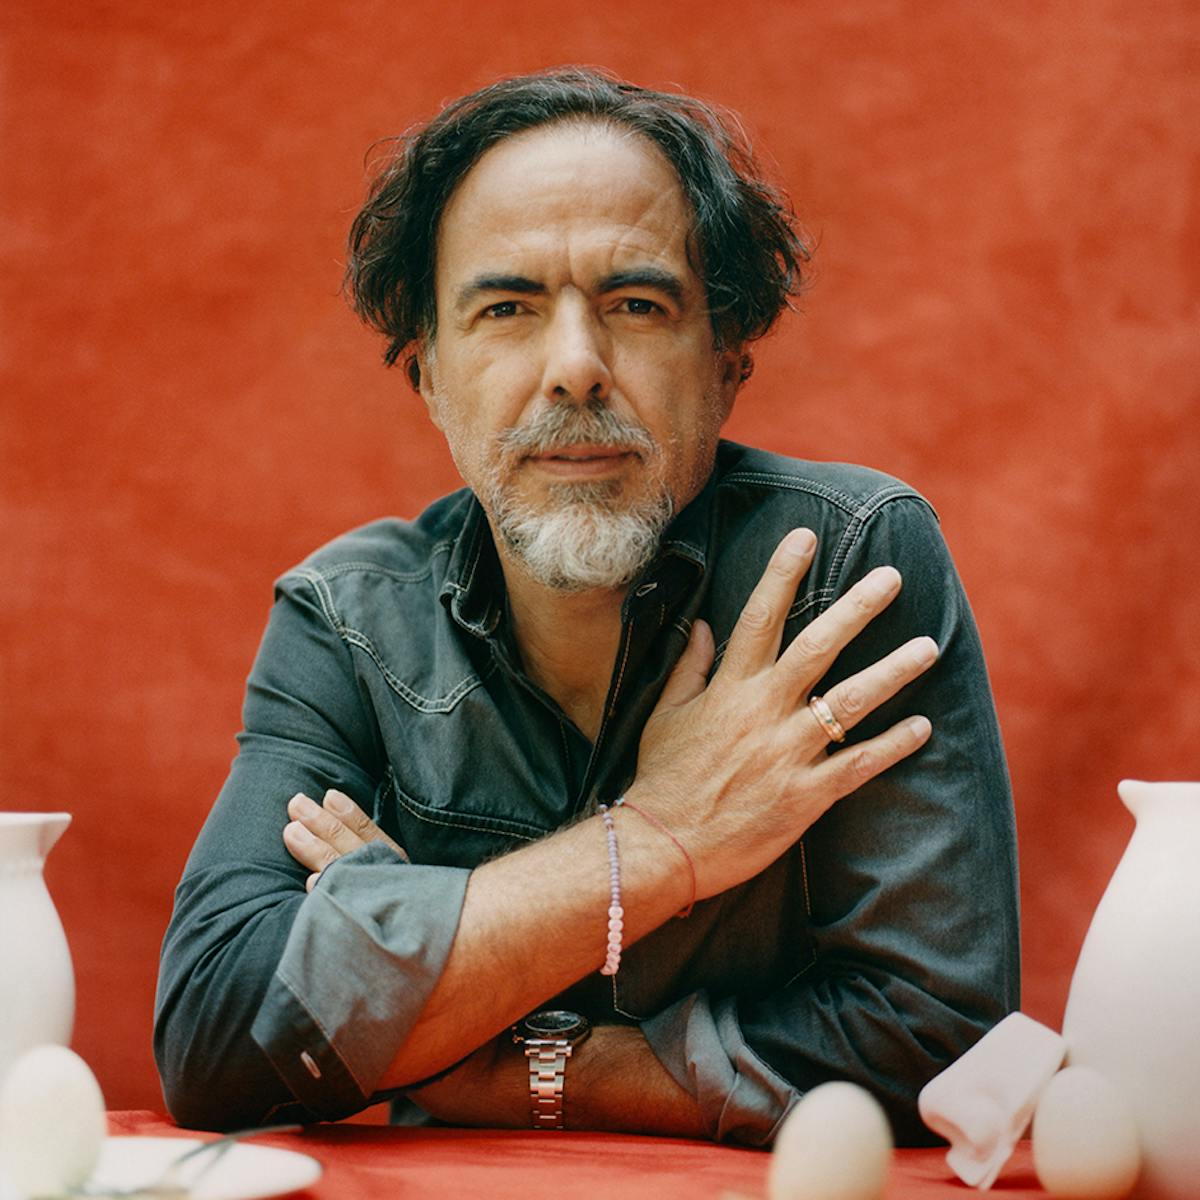 Alejandro González Iñárritu wears a denim shirt and sits against a red drape. In front of him are white ceramics and some eggs.